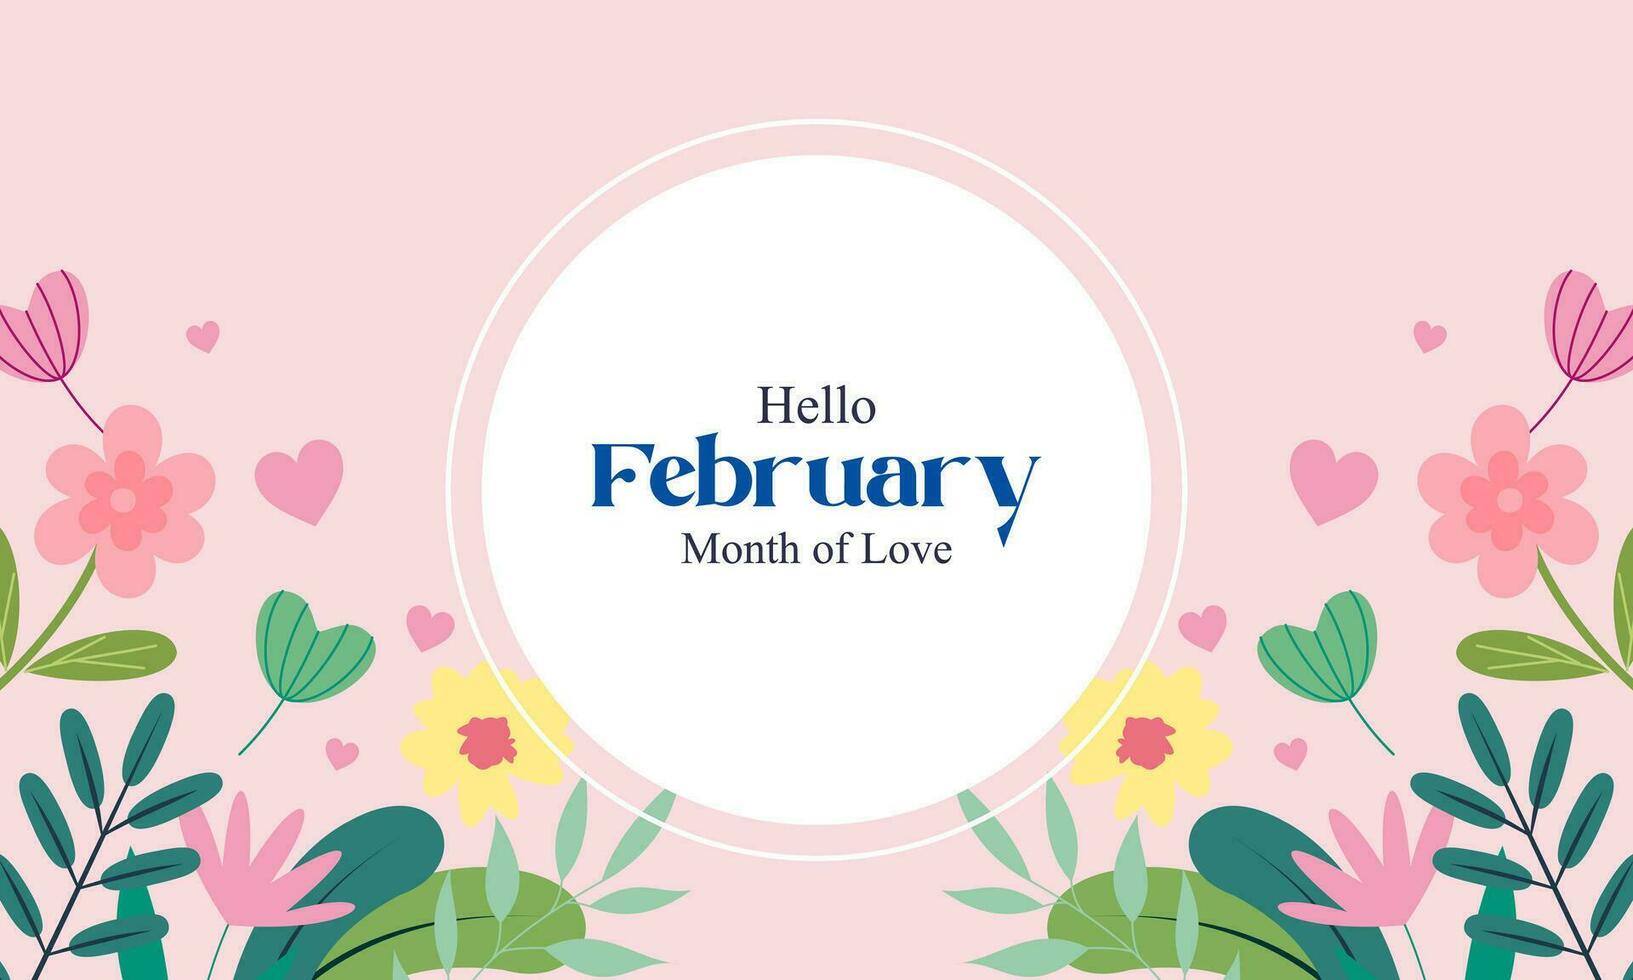 February month of love background vector